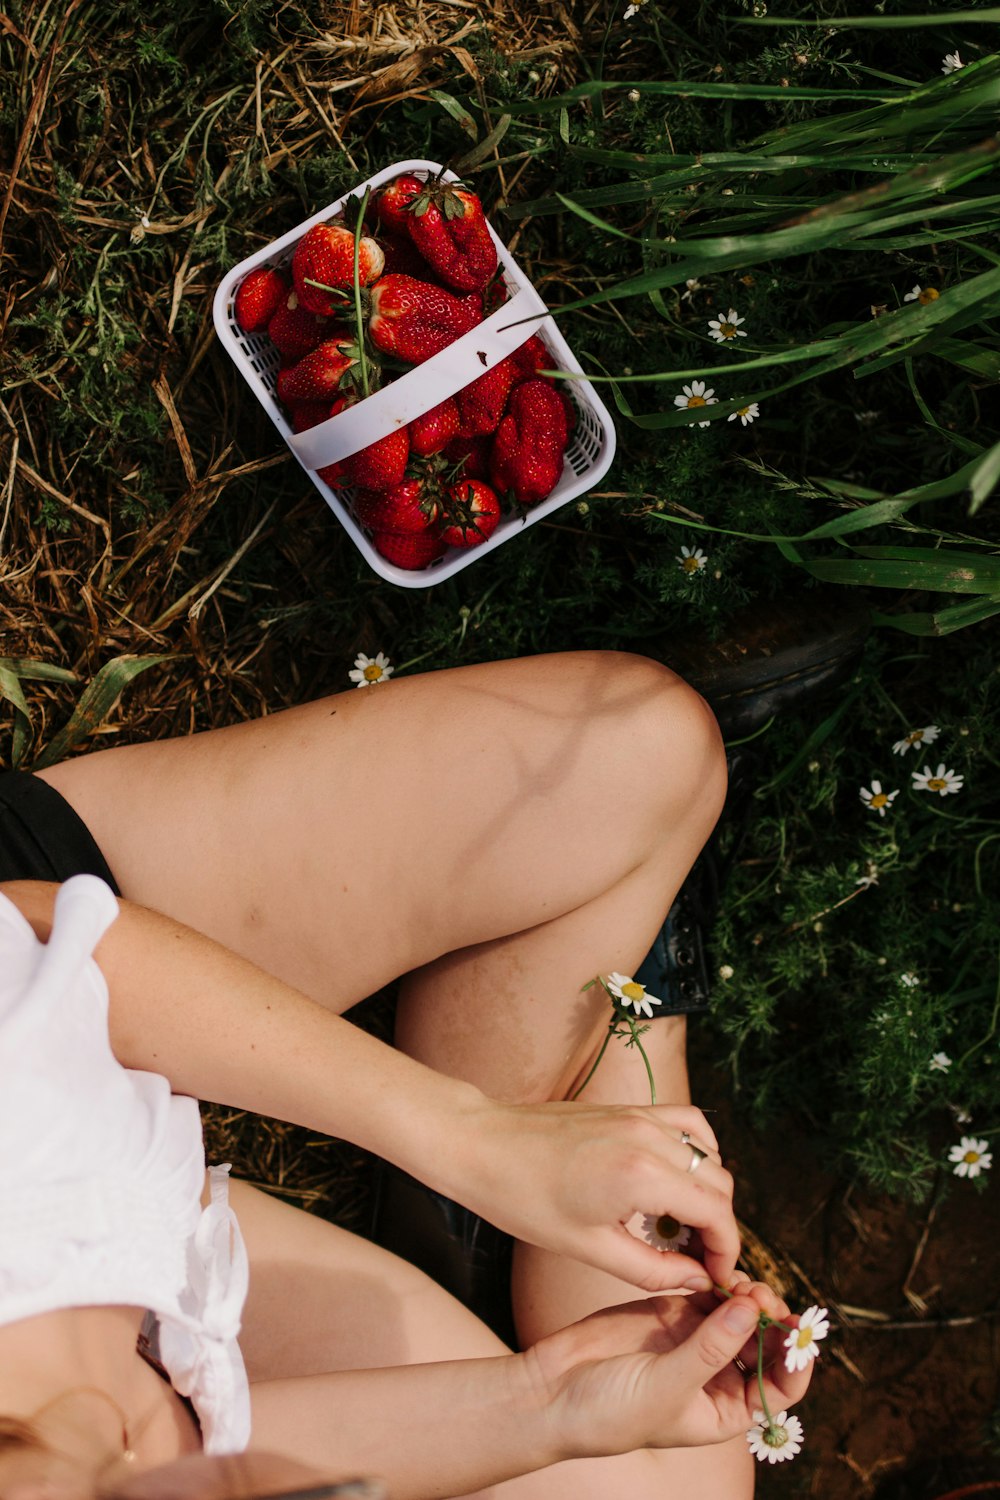 flay lay photography of woman sitting on ground beside basket of strawberries